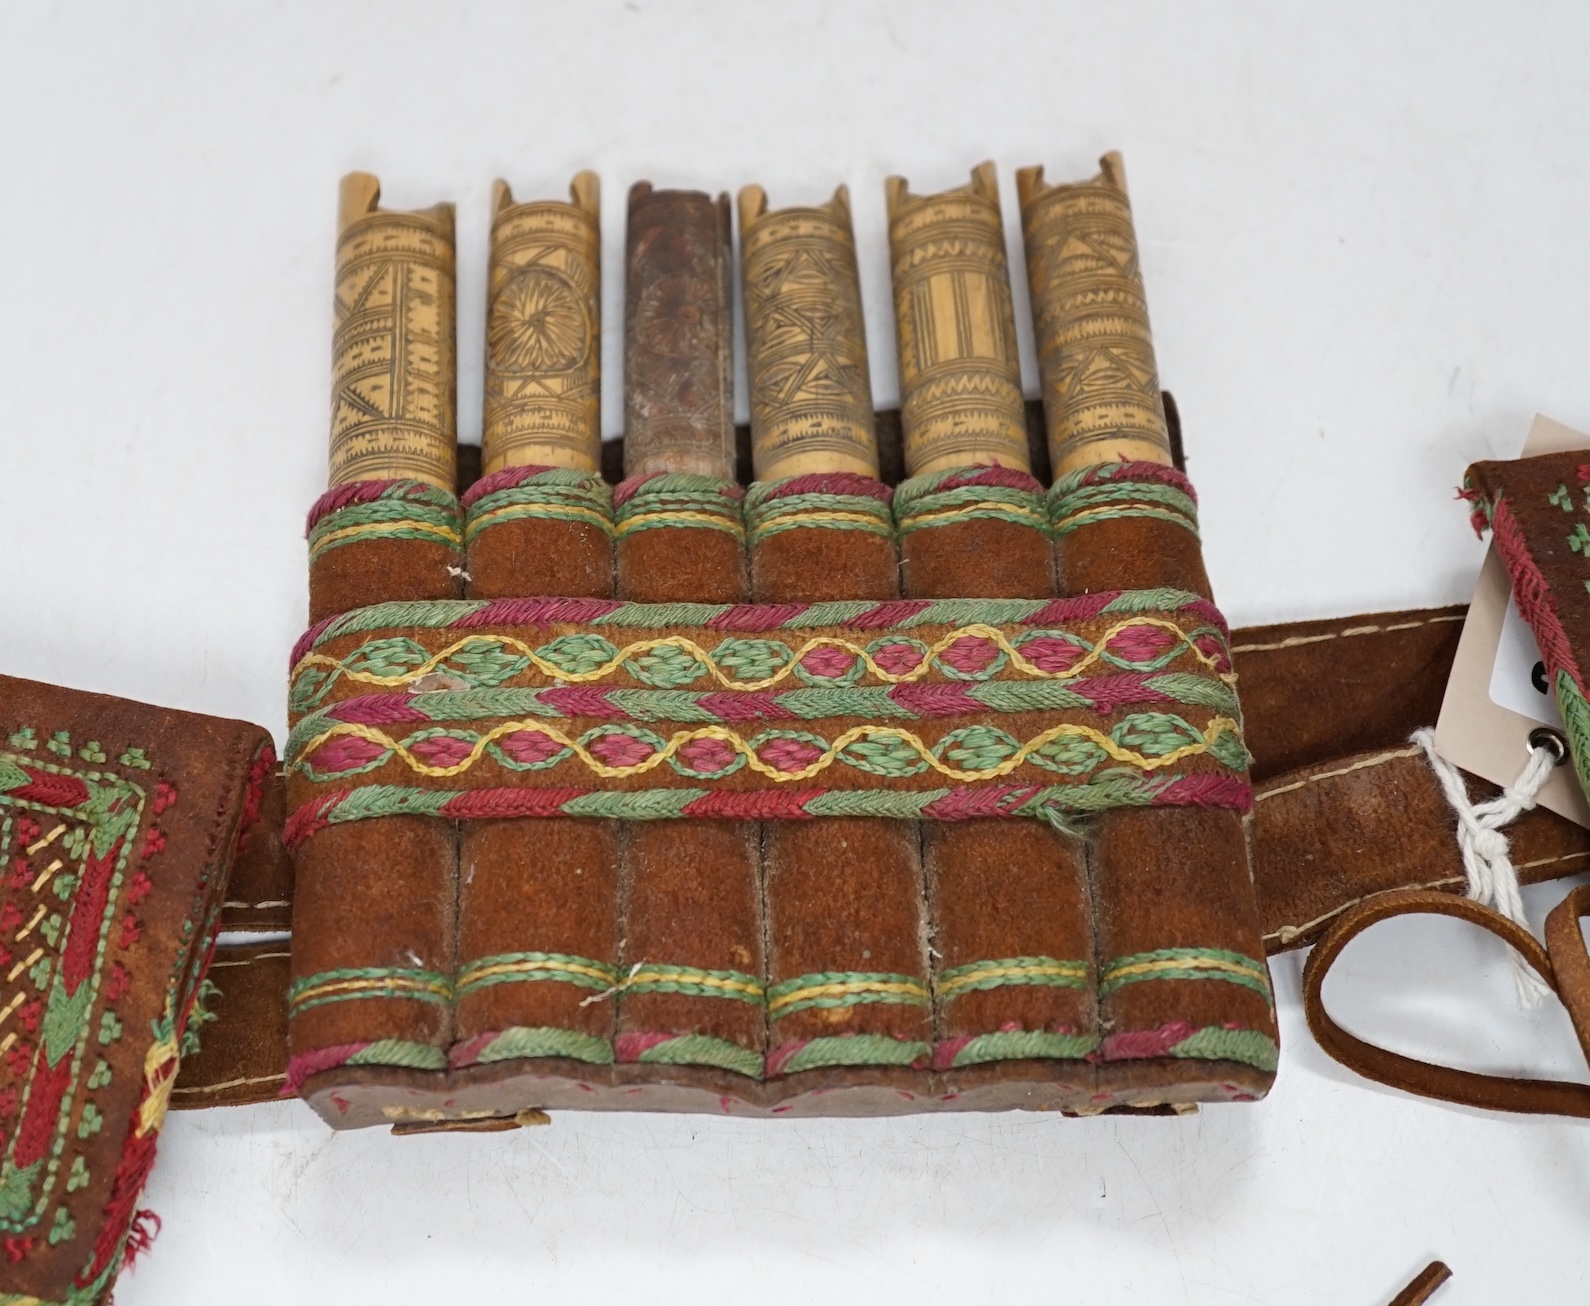 A 19th century Armenian gazyr belt, with decorative silk embroidery on suede and carved bamboo shot and gunpowder containers, 68cm long. Condition - slightly worn from use